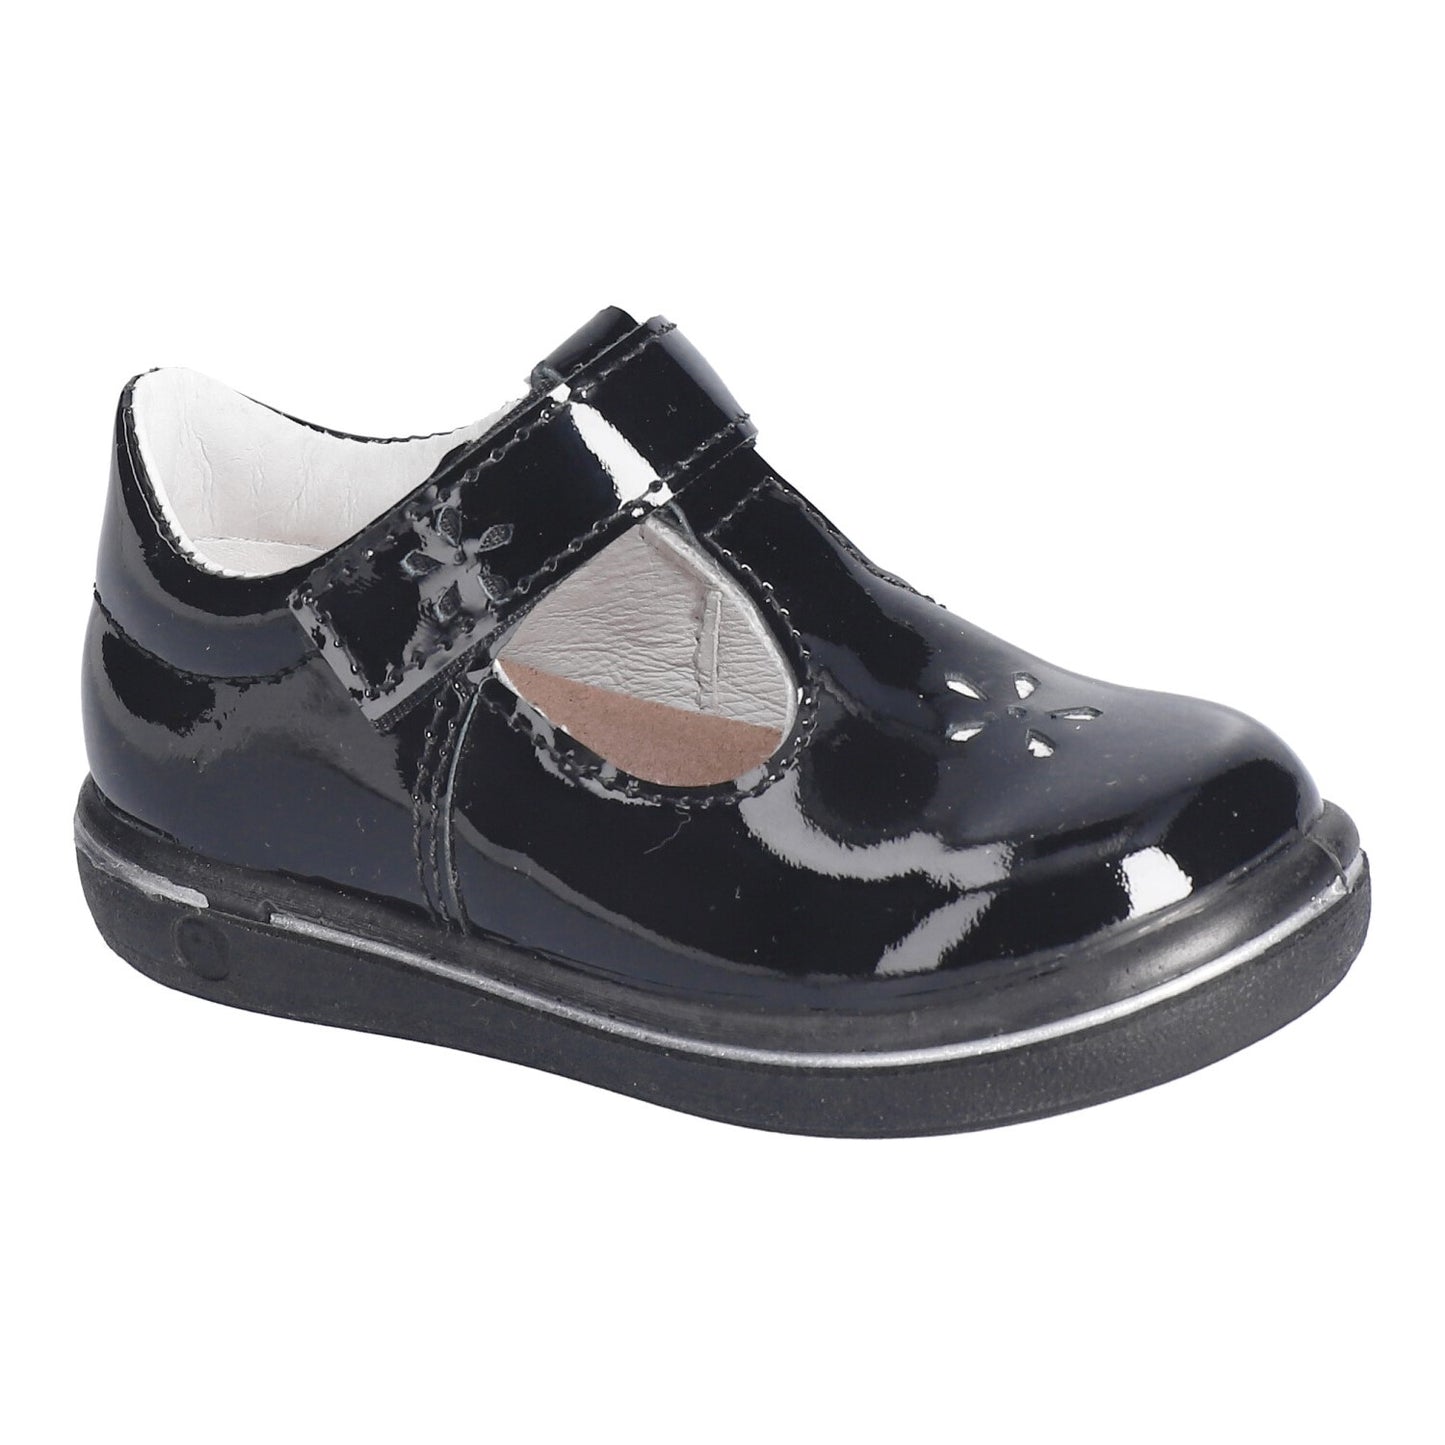 A girls T-Bar shoe by Ricosta, style Winona, in black patent with velcro fatening. Right side view.